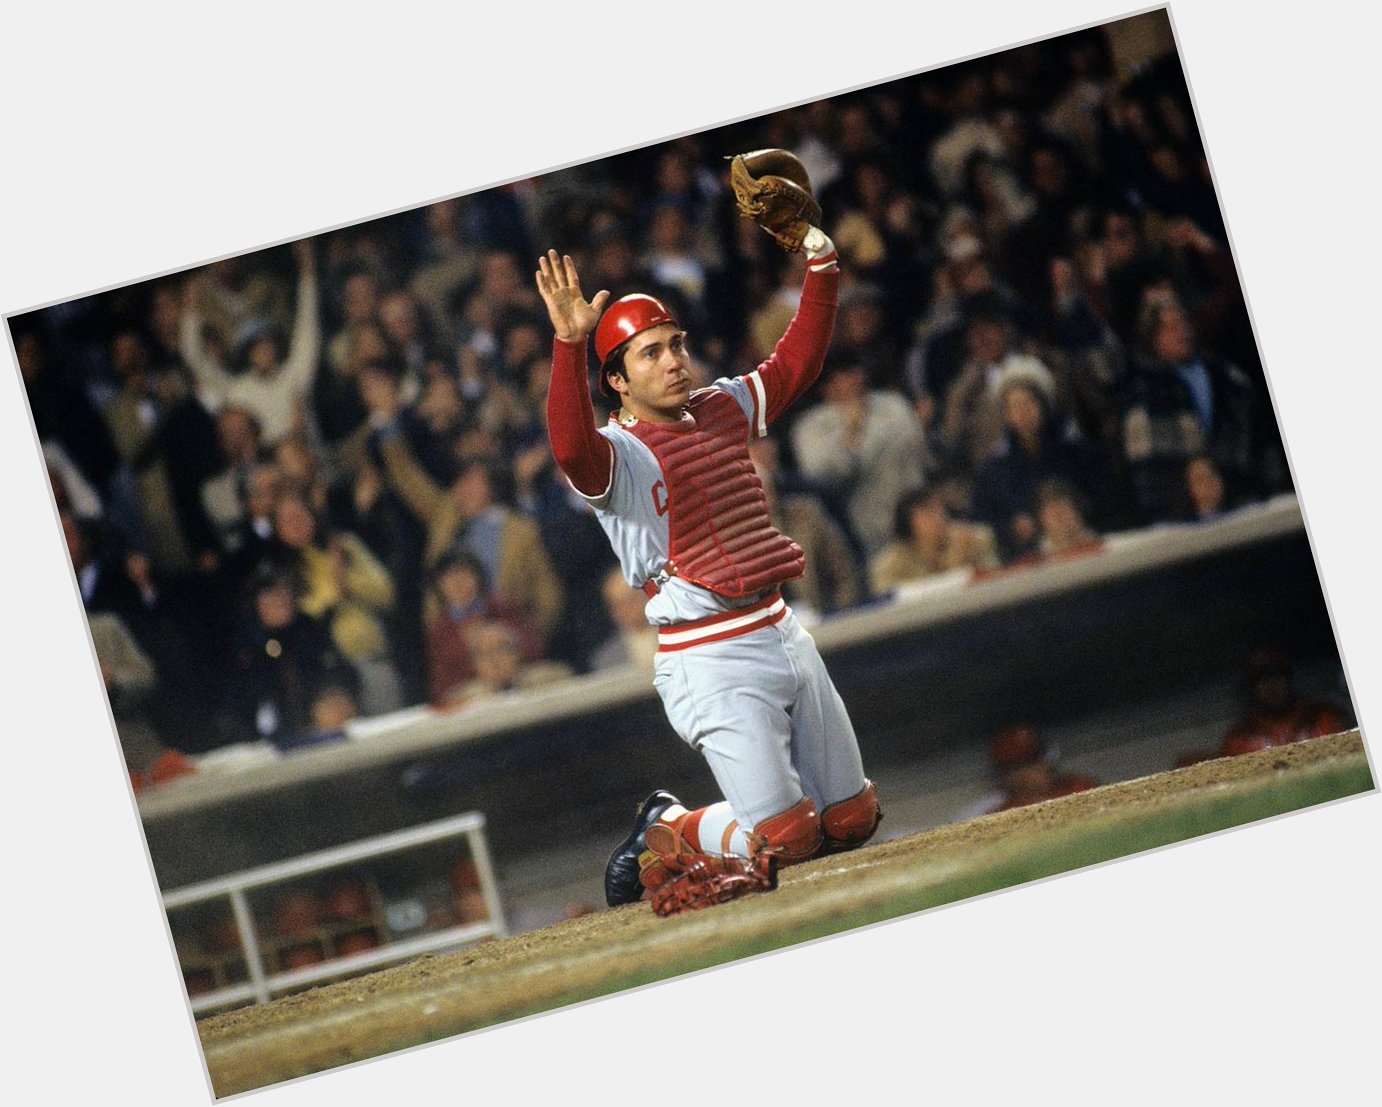 Happy Birthday to Johnny Bench who turns 70 today! 